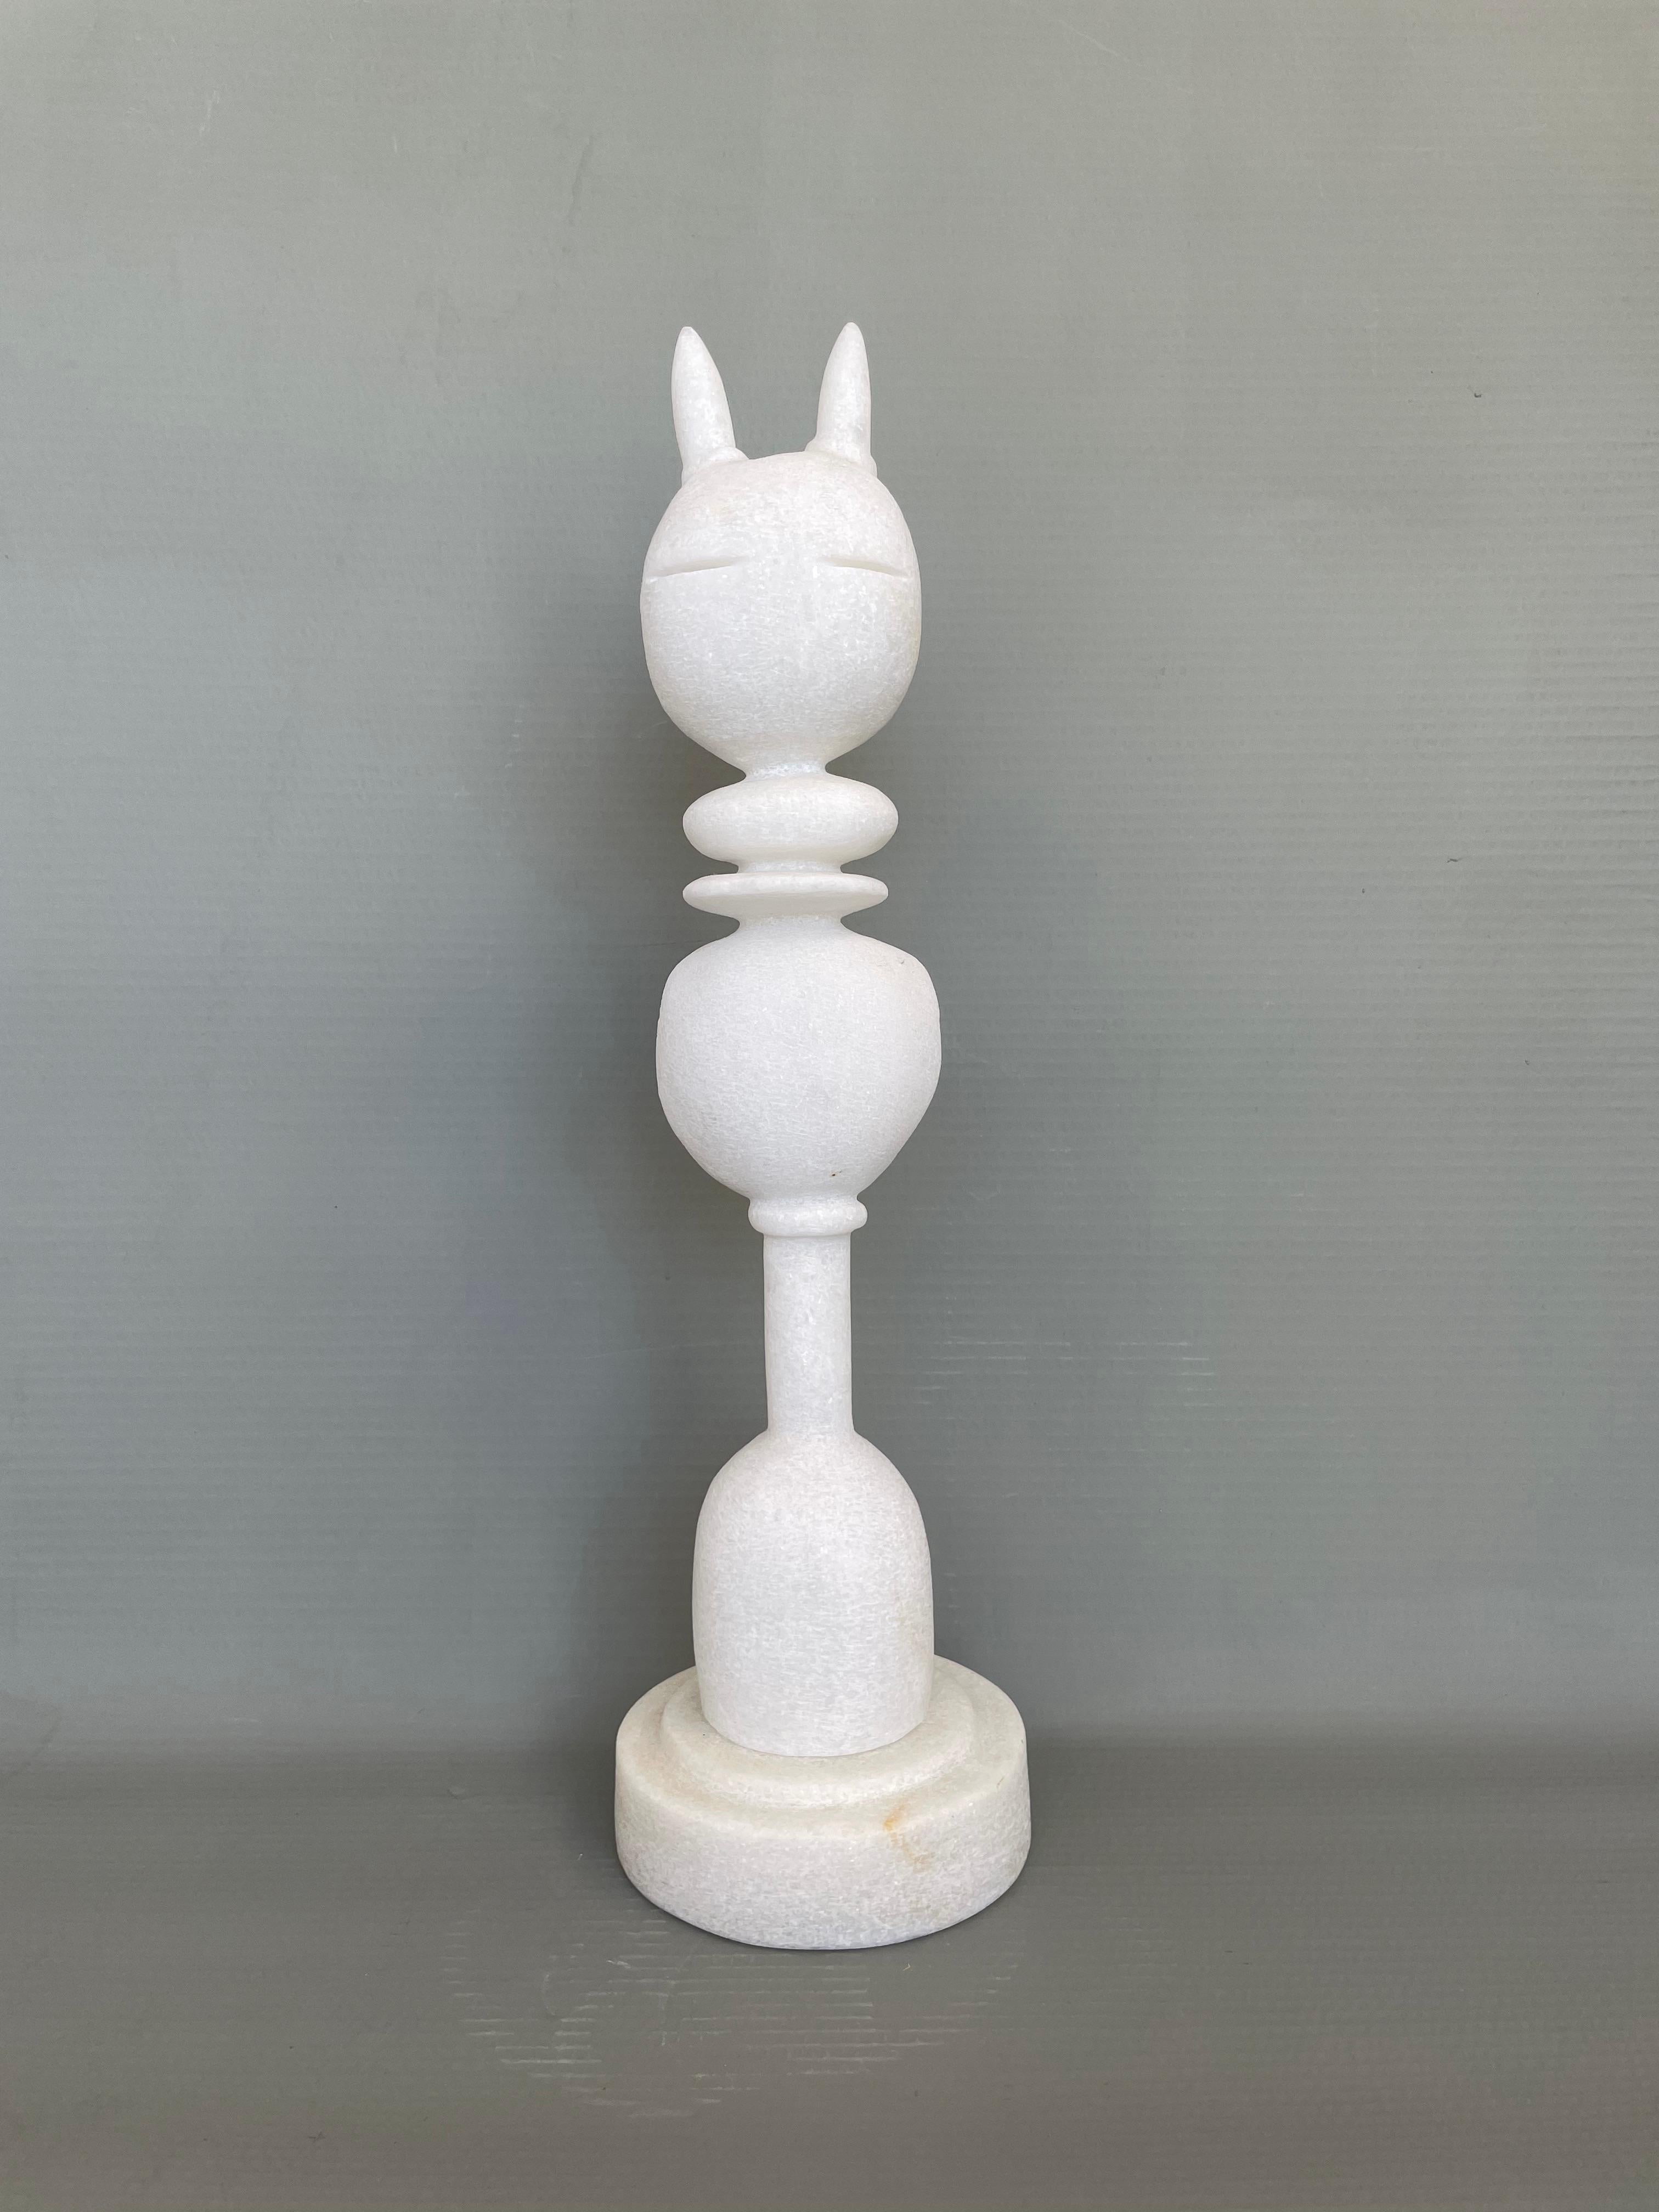 Cat King marble sculpture by Tom Von Kaenel
Dimensions: D15 x H53 cm
Materials: Marble

Tom von Kaenel, sculptor and painter, was born in Switzerland in 1961. Already in his early
childhood he was deeply devoted to art. His desire to bring